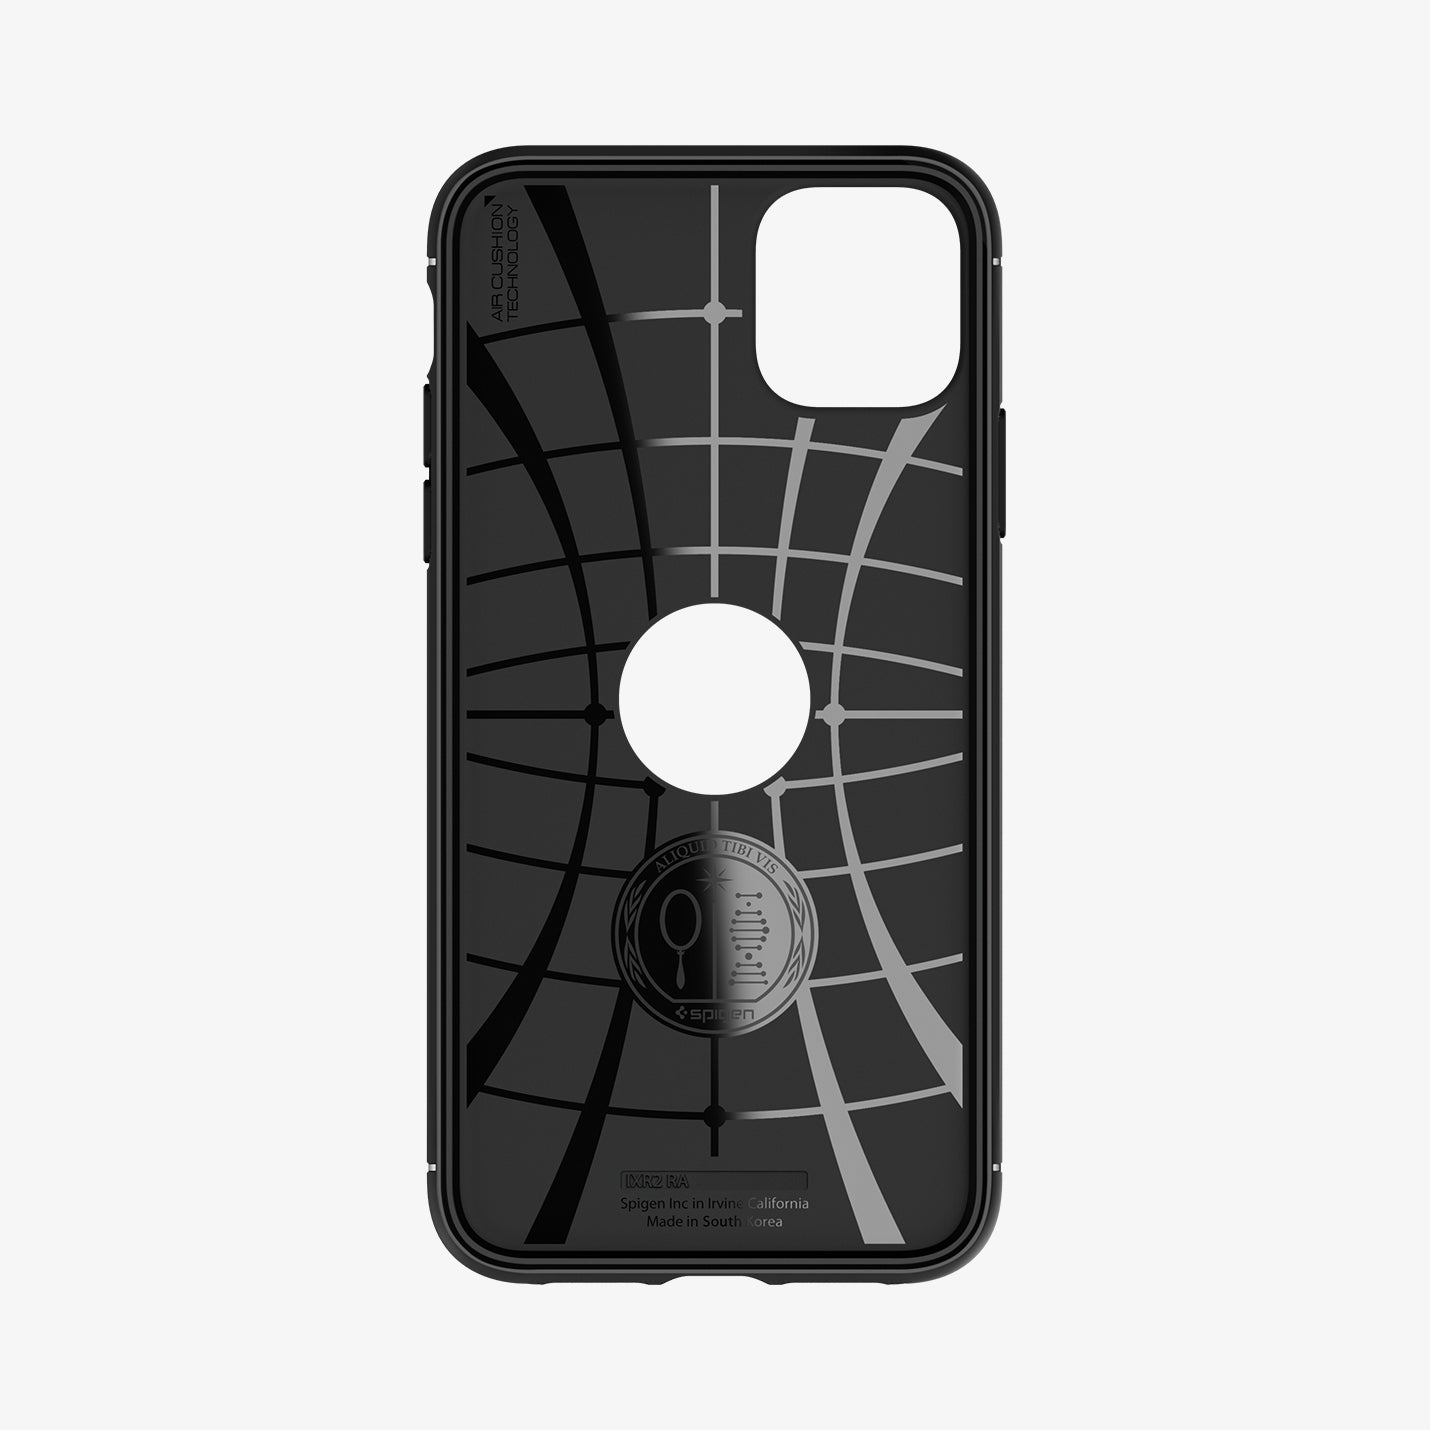 076CS27183 - iPhone 11 Case Rugged Armor in Matte Black showing the inner case with spider web pattern